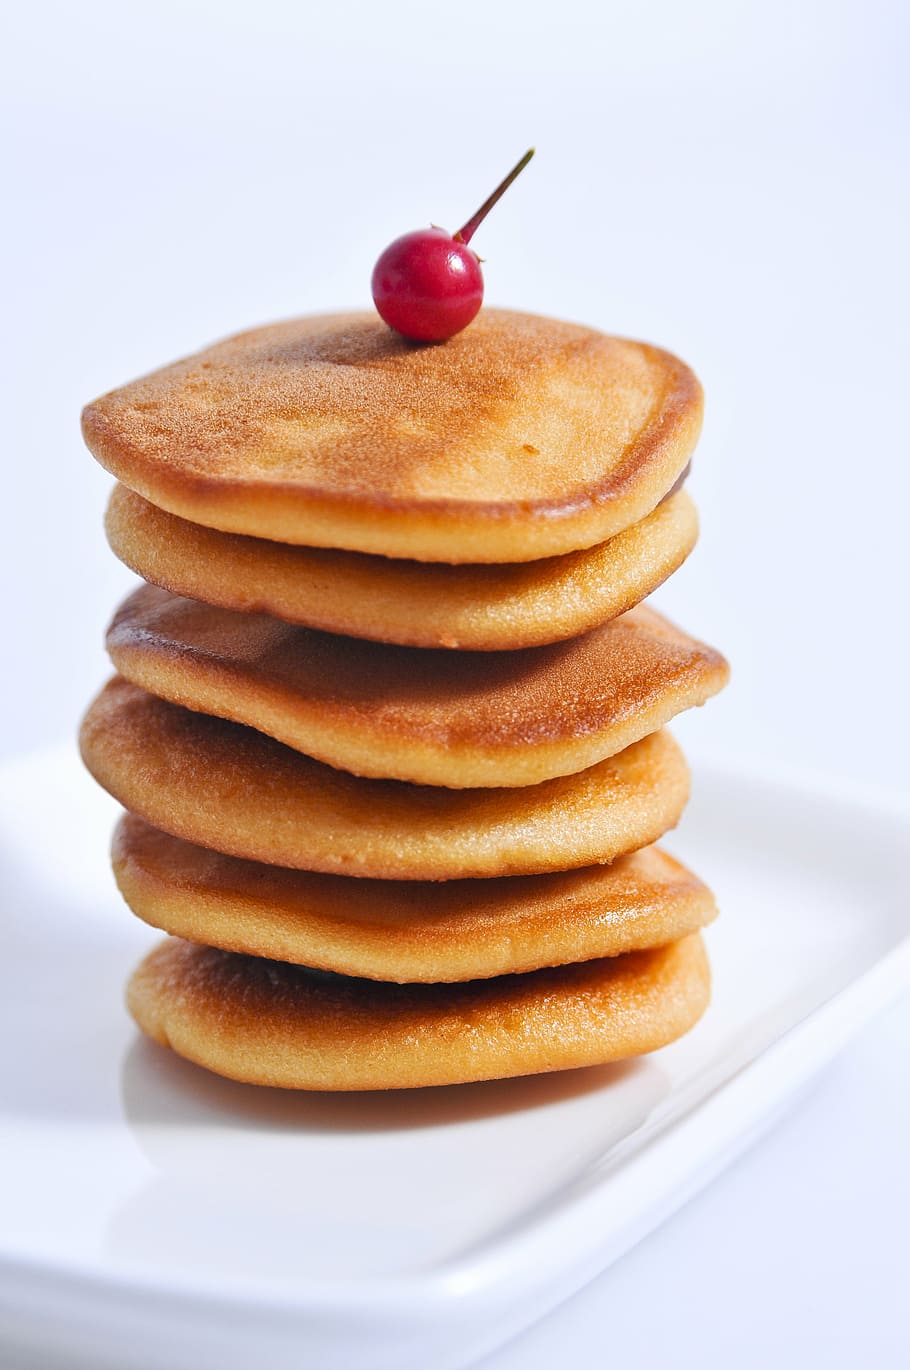 red, cherry, pancake, dorayaki, snacks, afternoon tea snacks, delicious, simple, red fruits, stacked